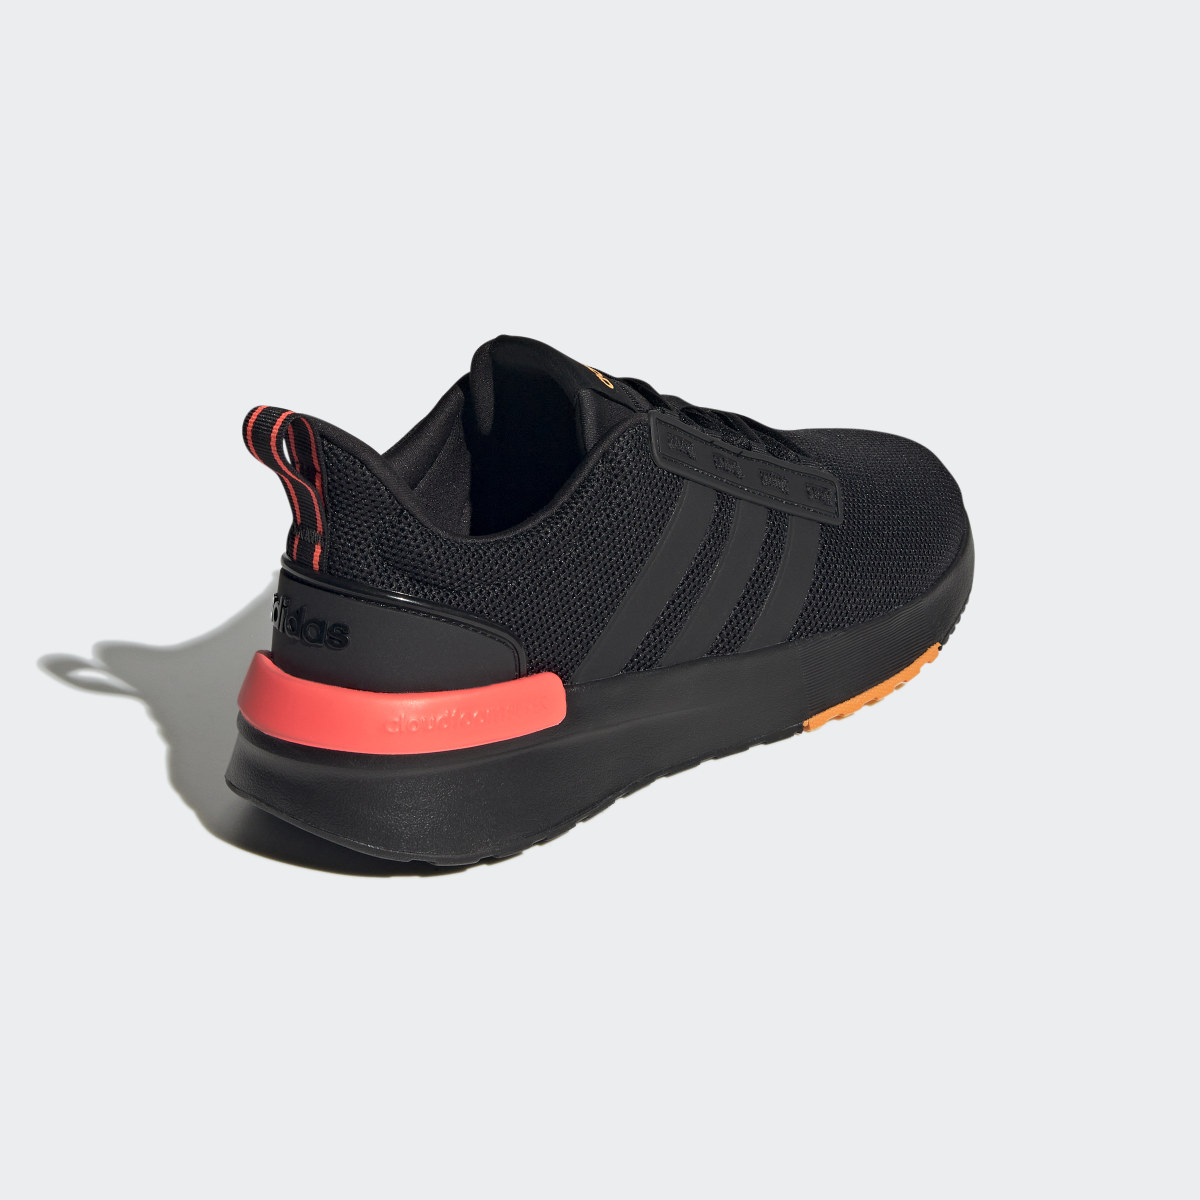 Adidas Racer TR21 Shoes. 6